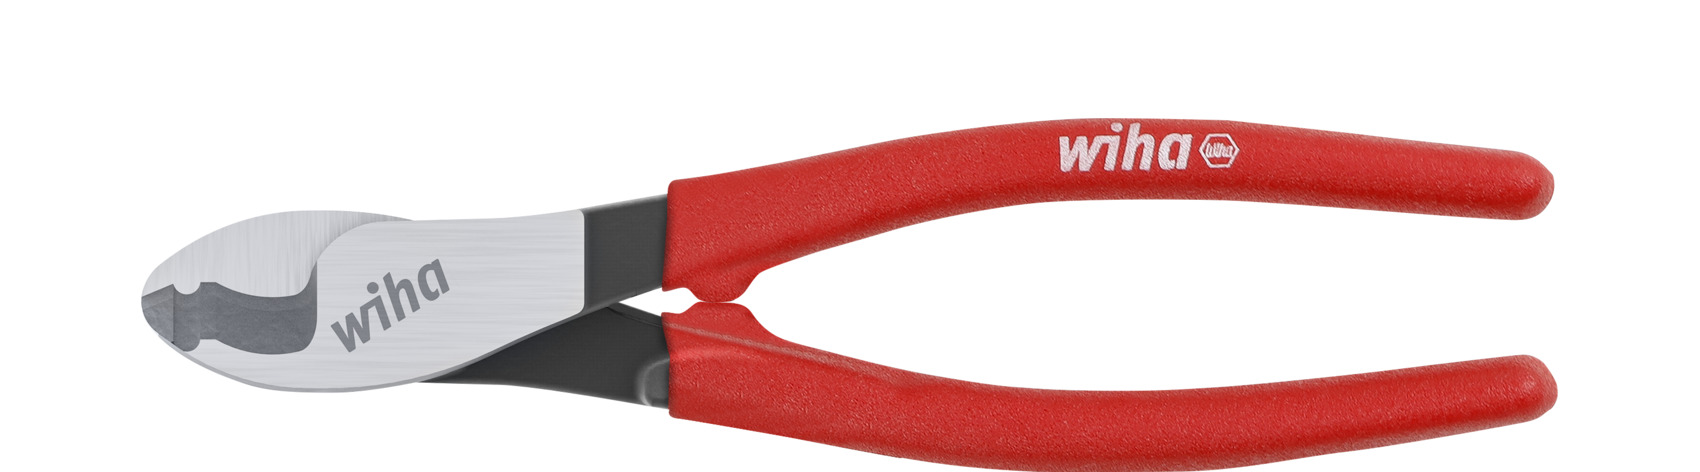 Wiha Electrical Tool- 32826 Serrated Edge Cable Cutters